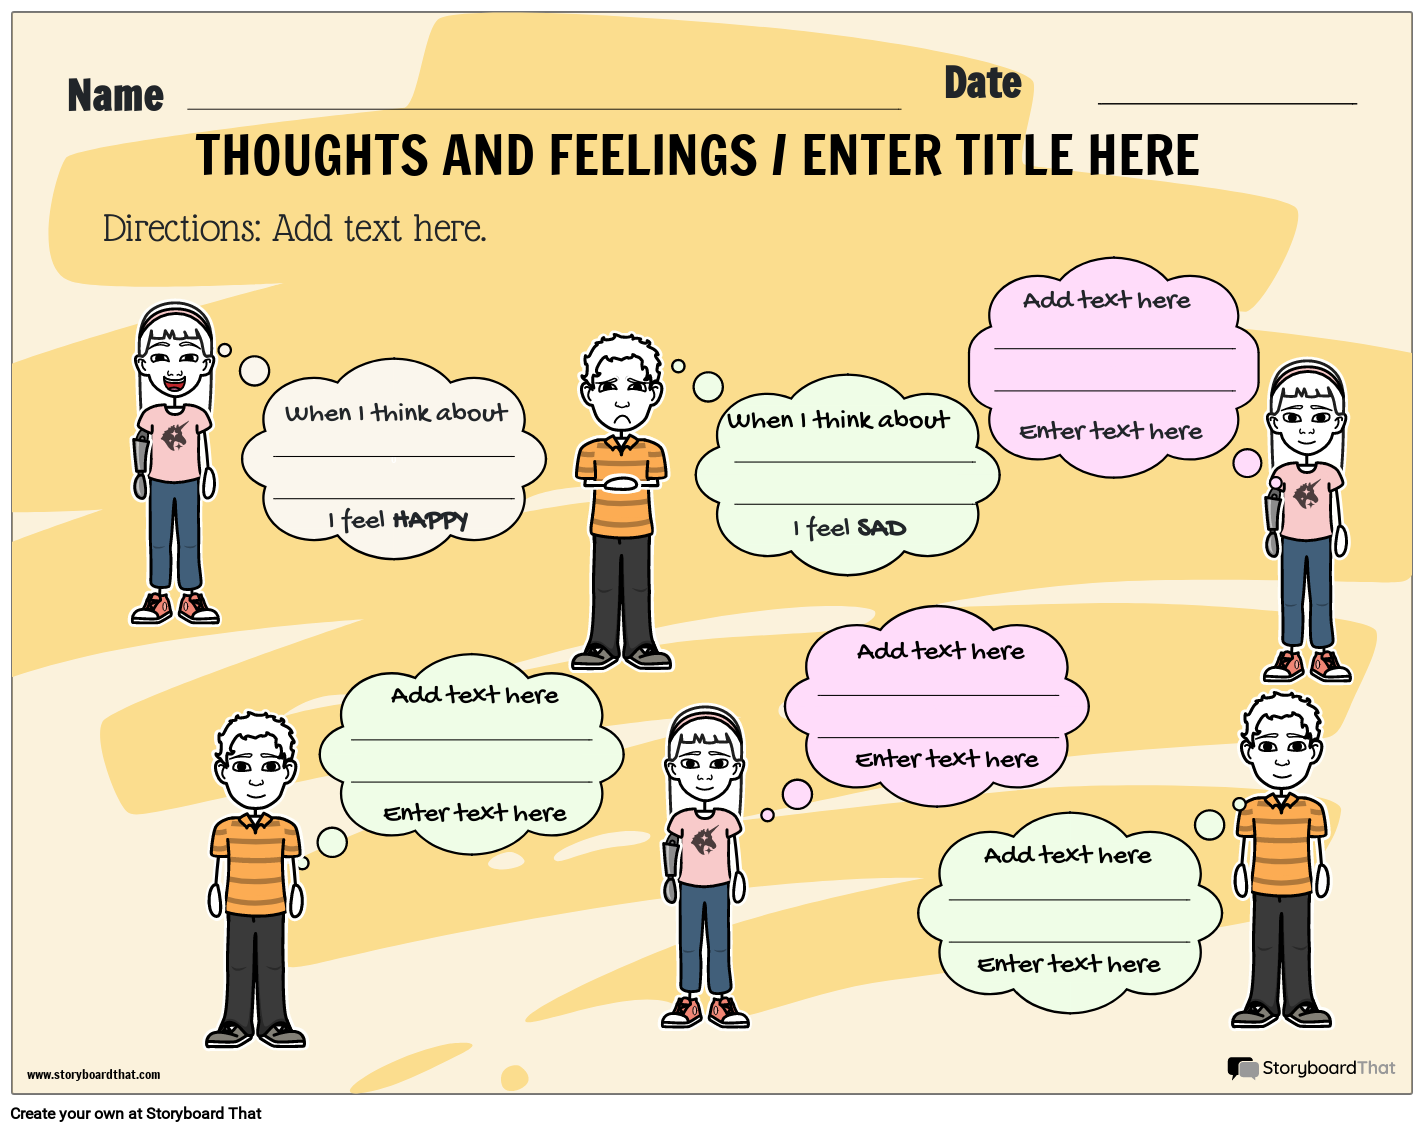 Thoughts and feelings worksheet